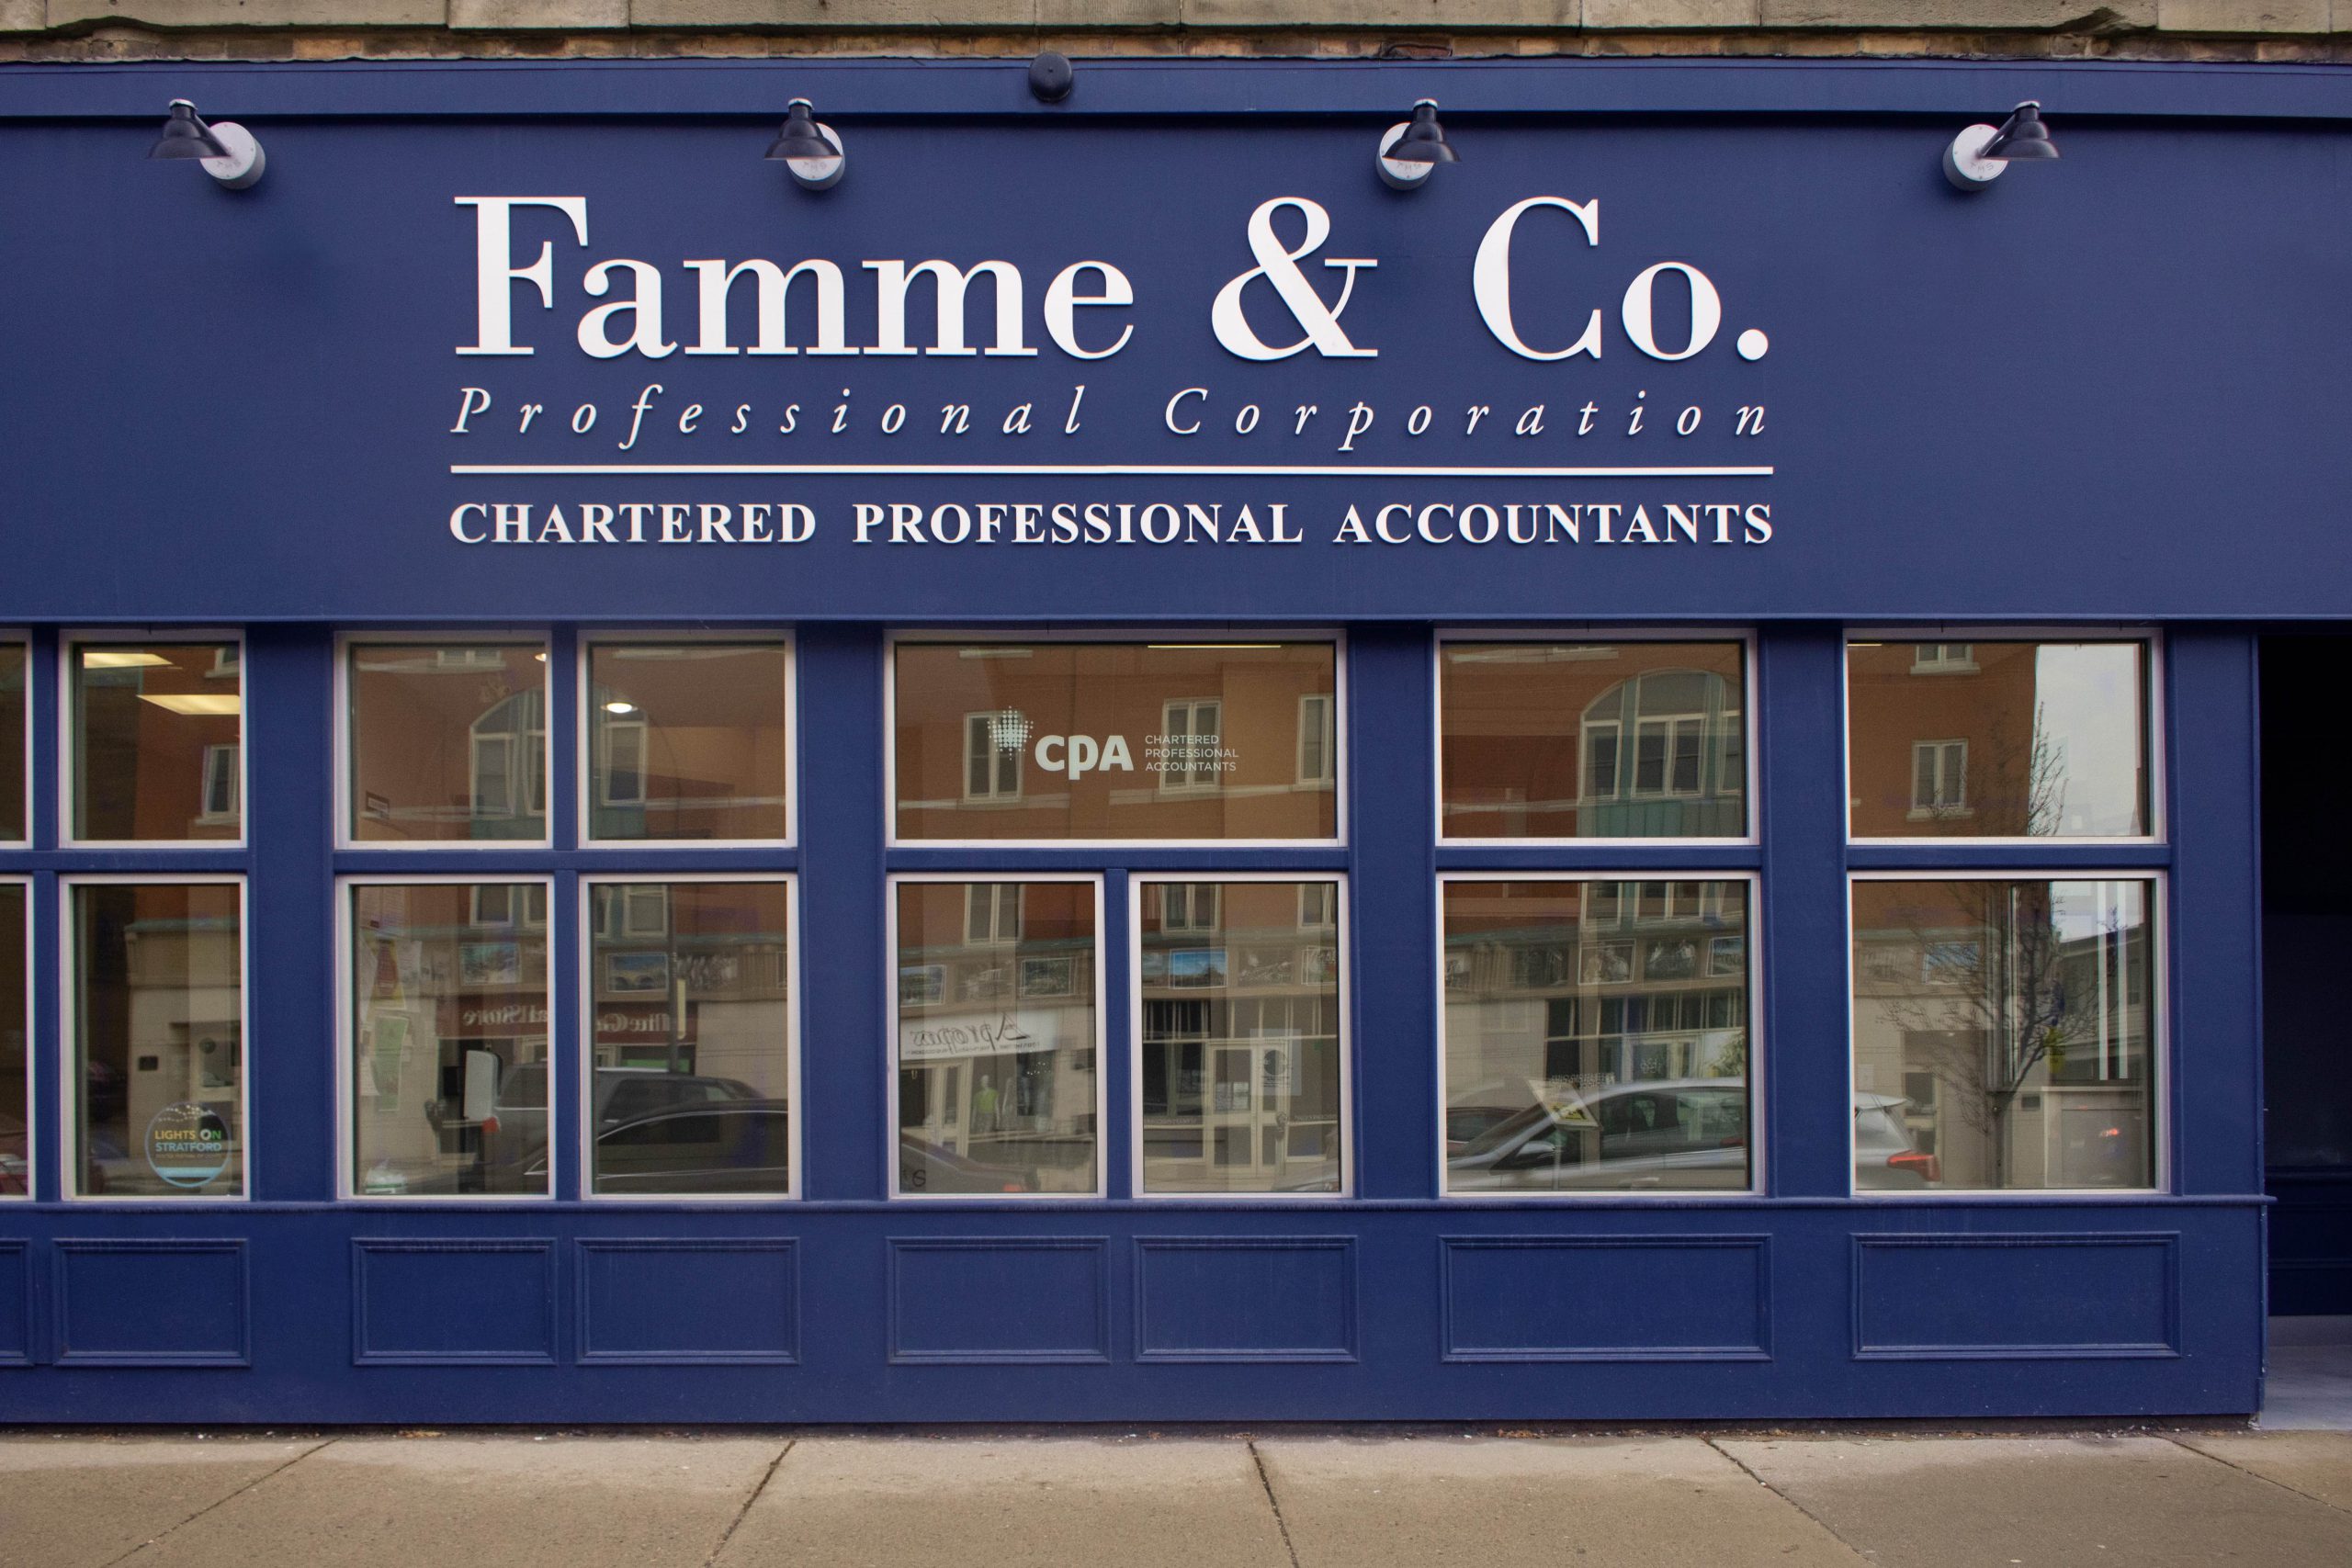 Famme & Co. Chartered Professional Accountants Stratford location building and store front.